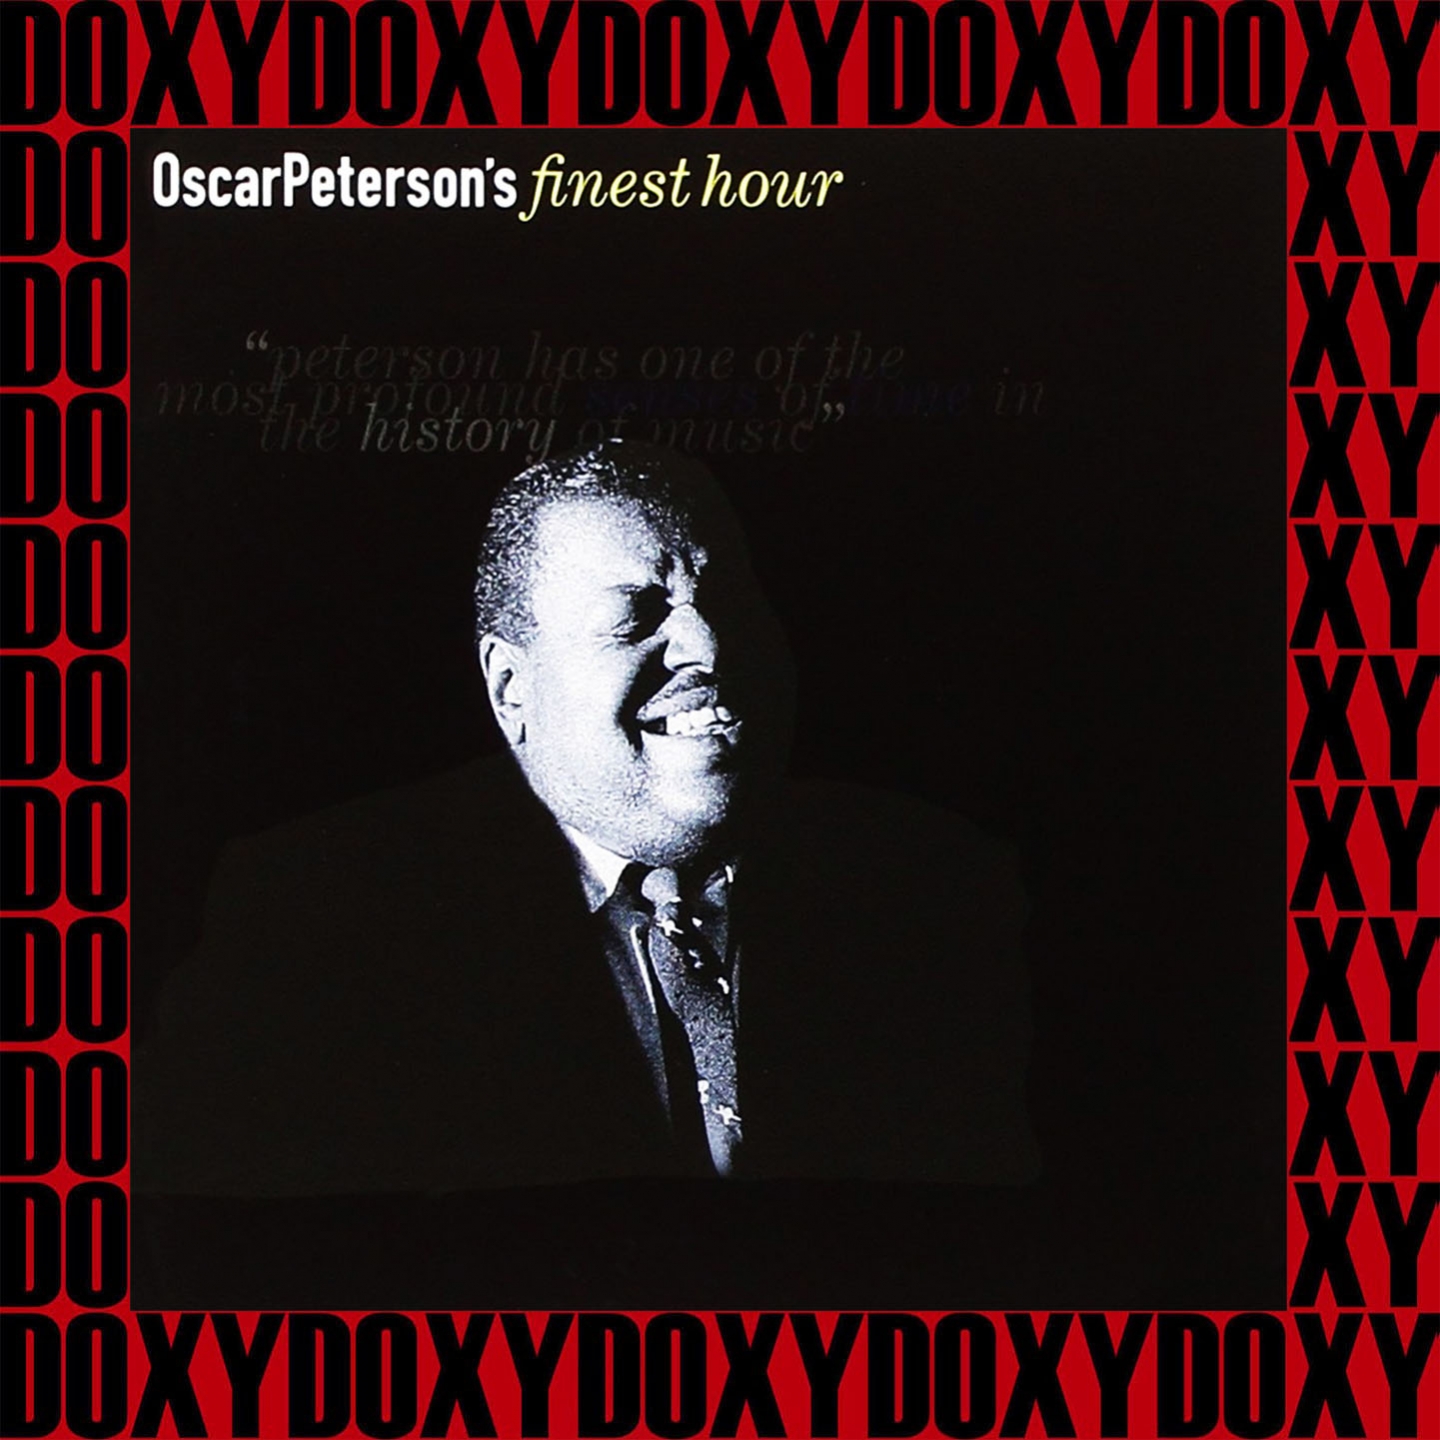 Oscar Peterson's Finest Hour, 1950-1964 (Remastered Version) (Doxy Collection)